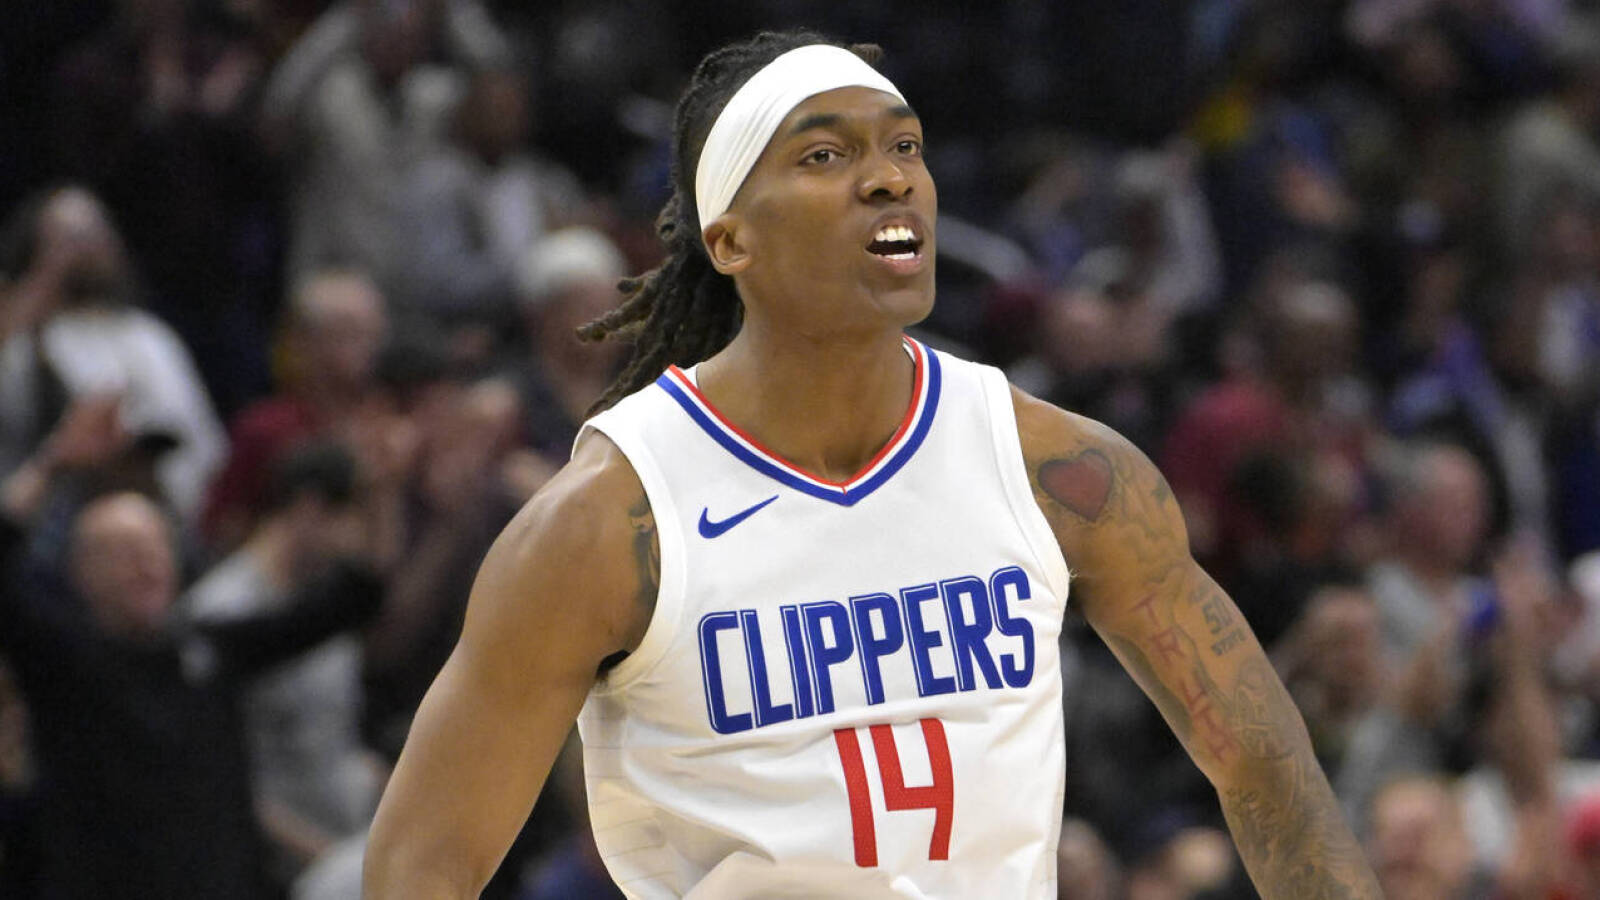 Watch: Clippers wing delivers a 'Mann's jam' in Game 2 against Mavericks